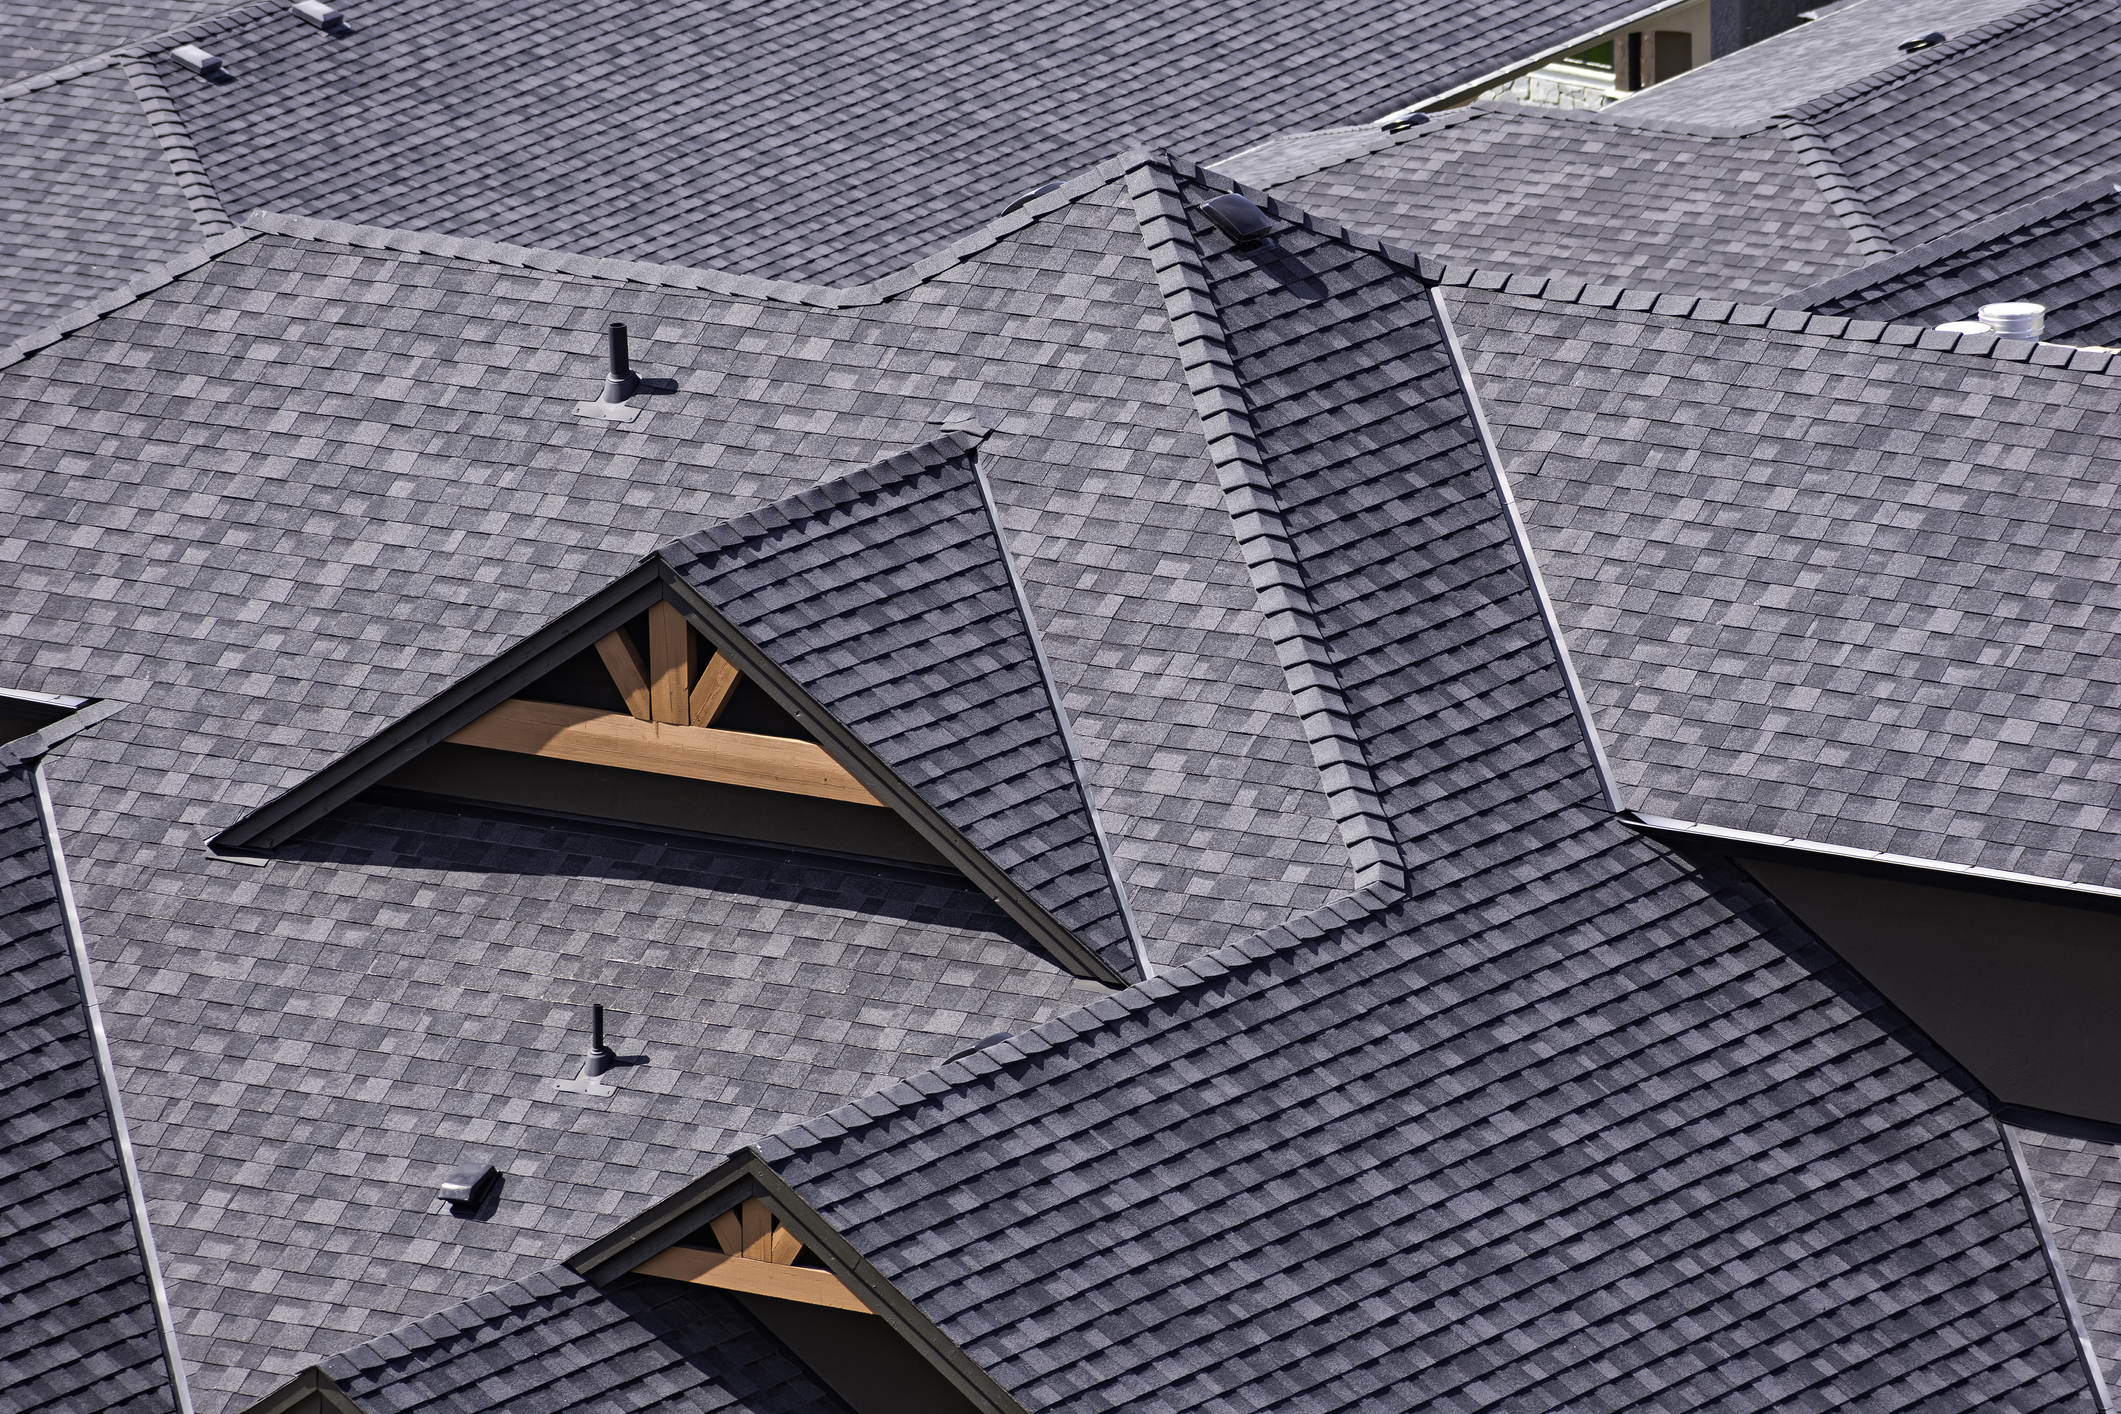 Rooftop in a newly constructed subdivision showing asphalt shingles